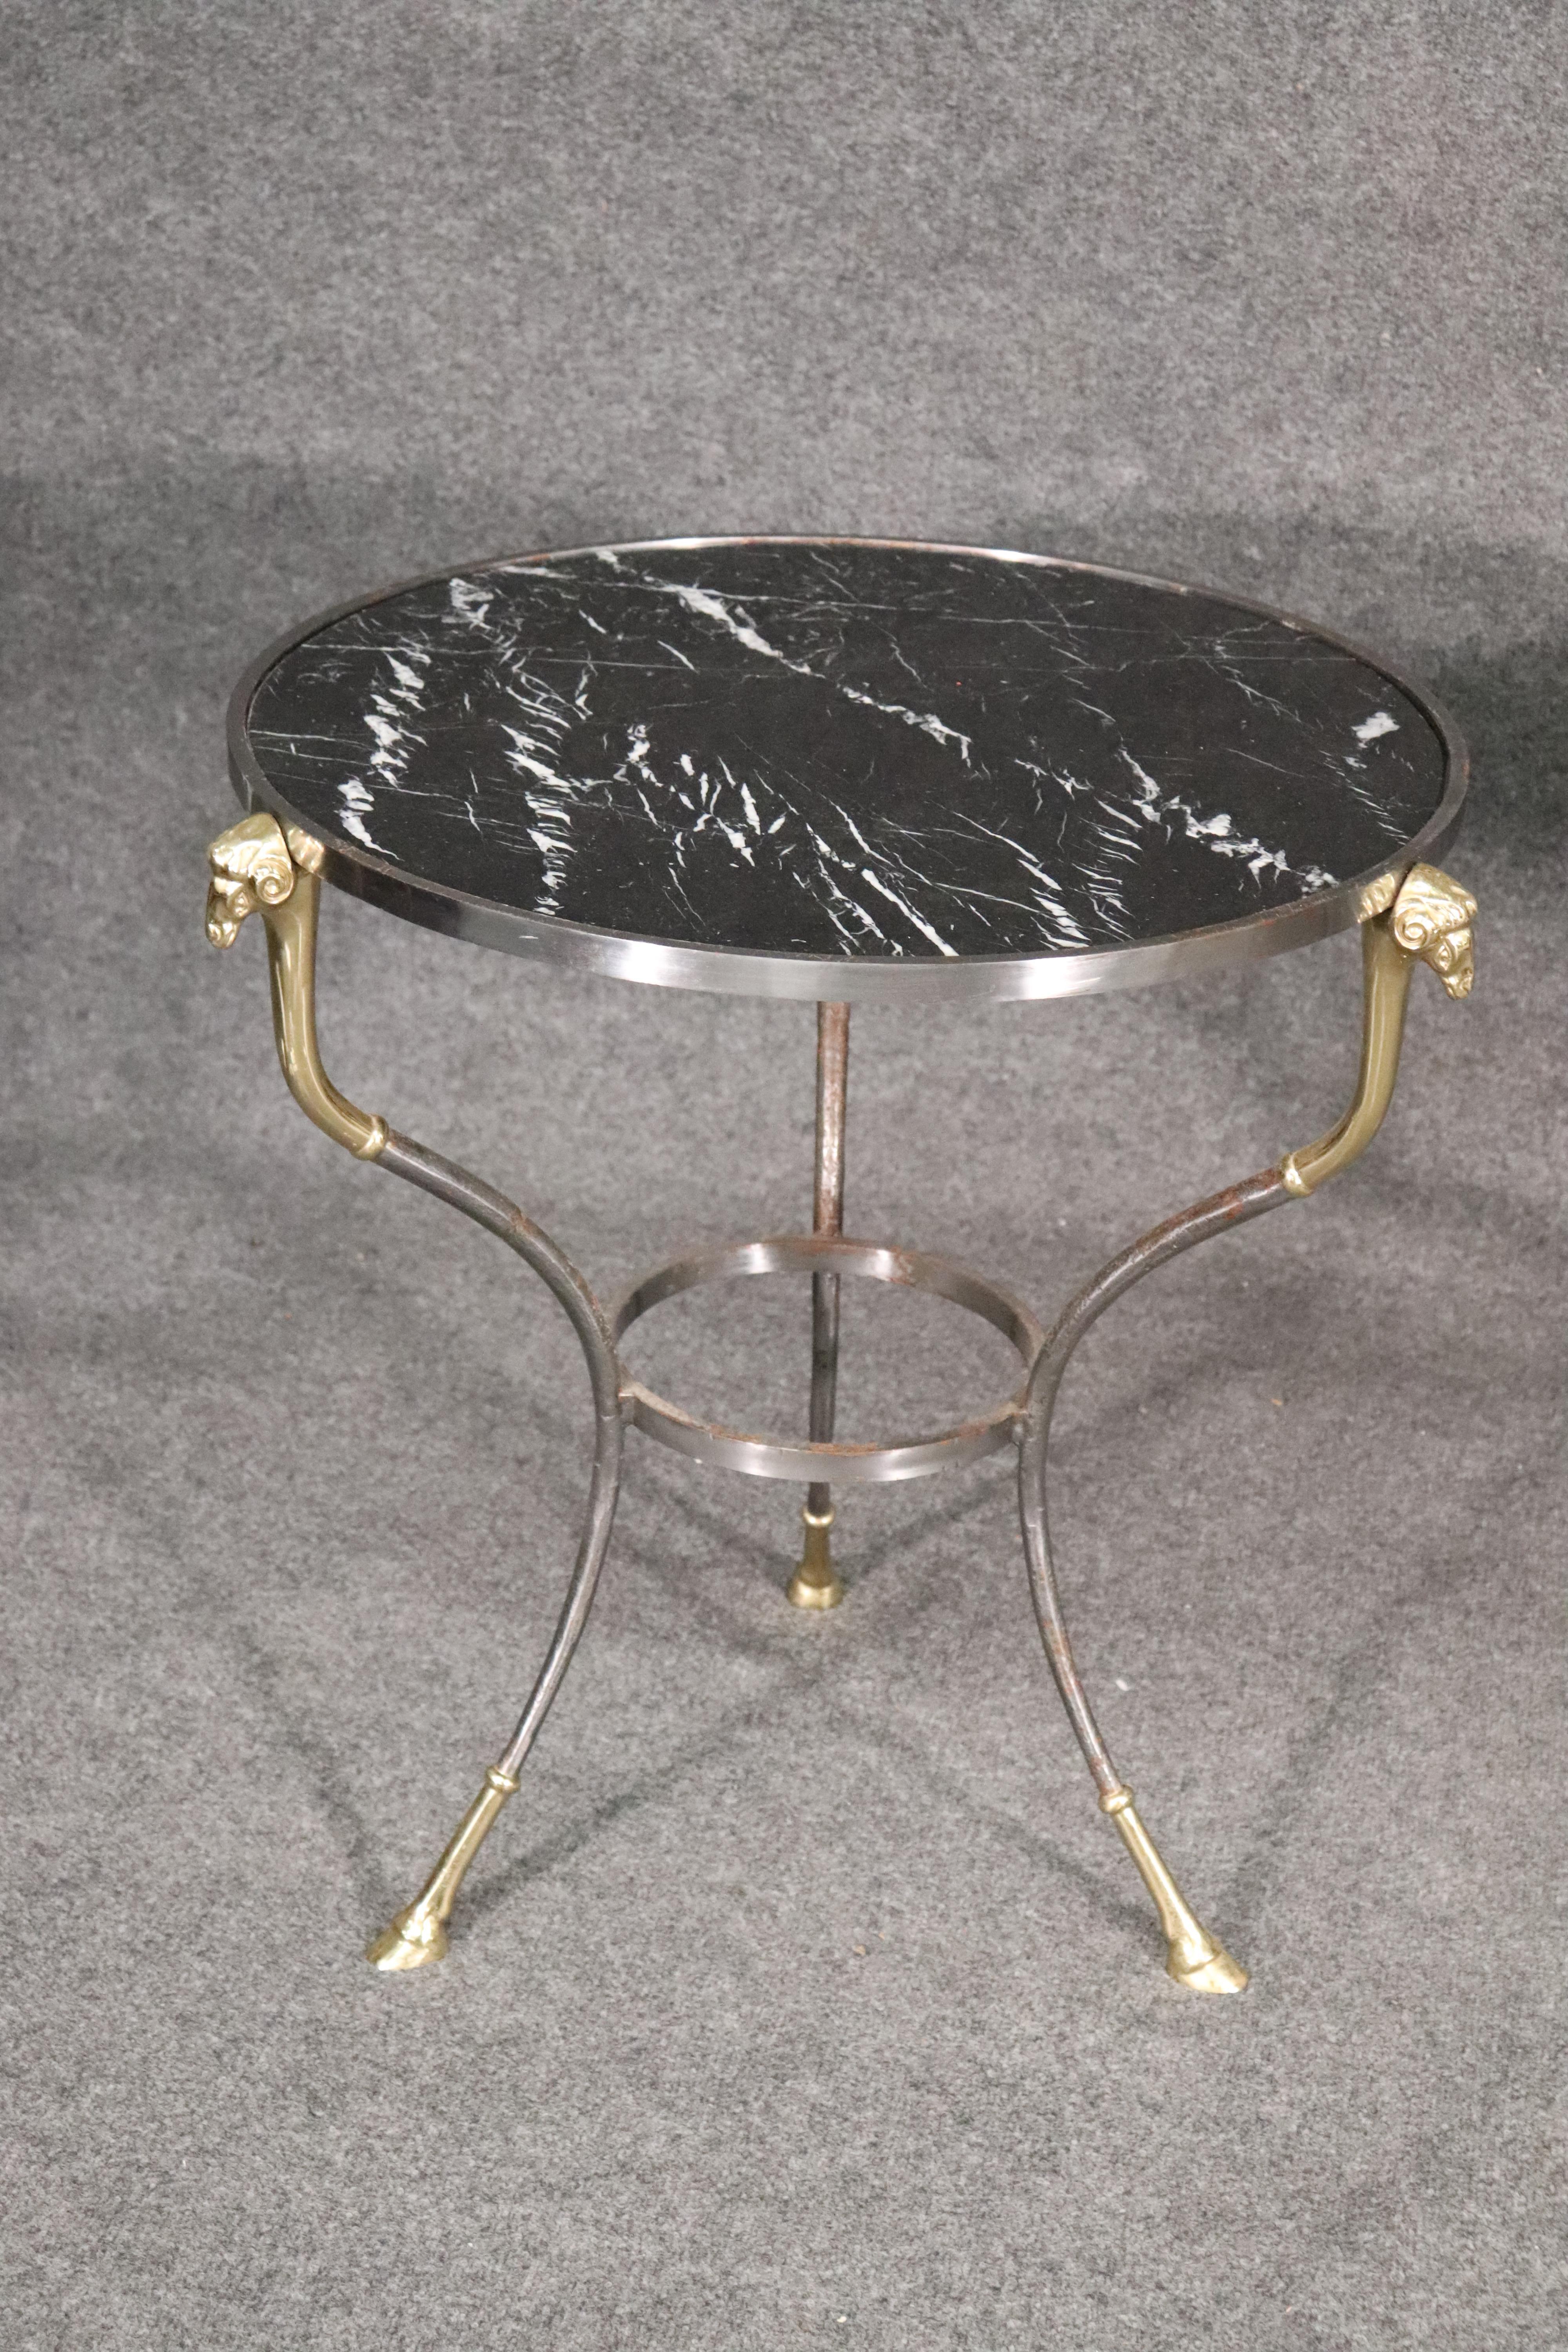 These are beautifully made brass and steel geuridons. The tables feature the classic rams head terminals and cloven hooved feet done in brass. The marble tops are black with white veins. These beautiful tables may be just what you're looking for.